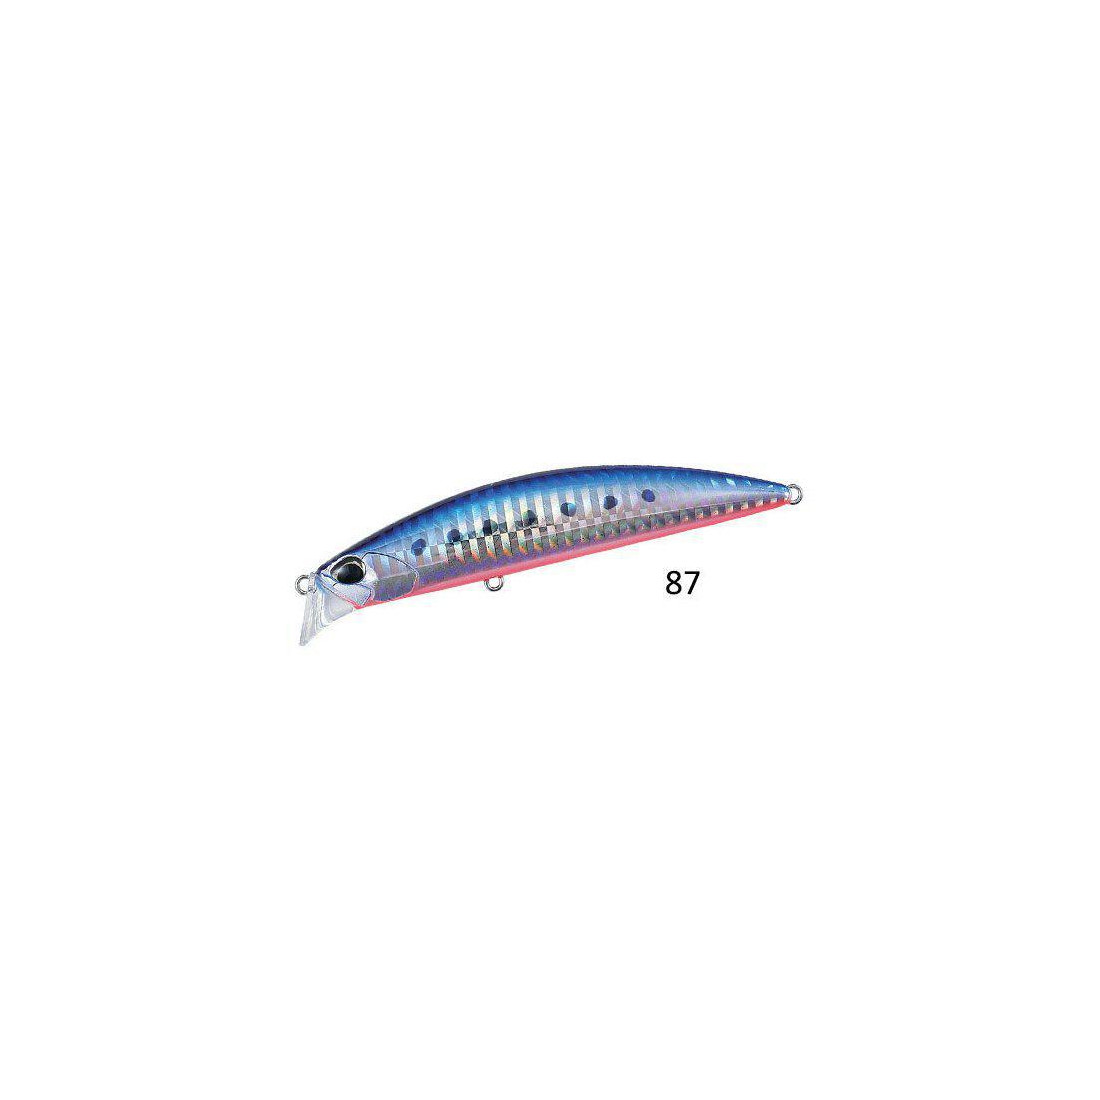 9874 DUO for sale online Beach Walker 95s Axcion Sinking Lure Aka0026 